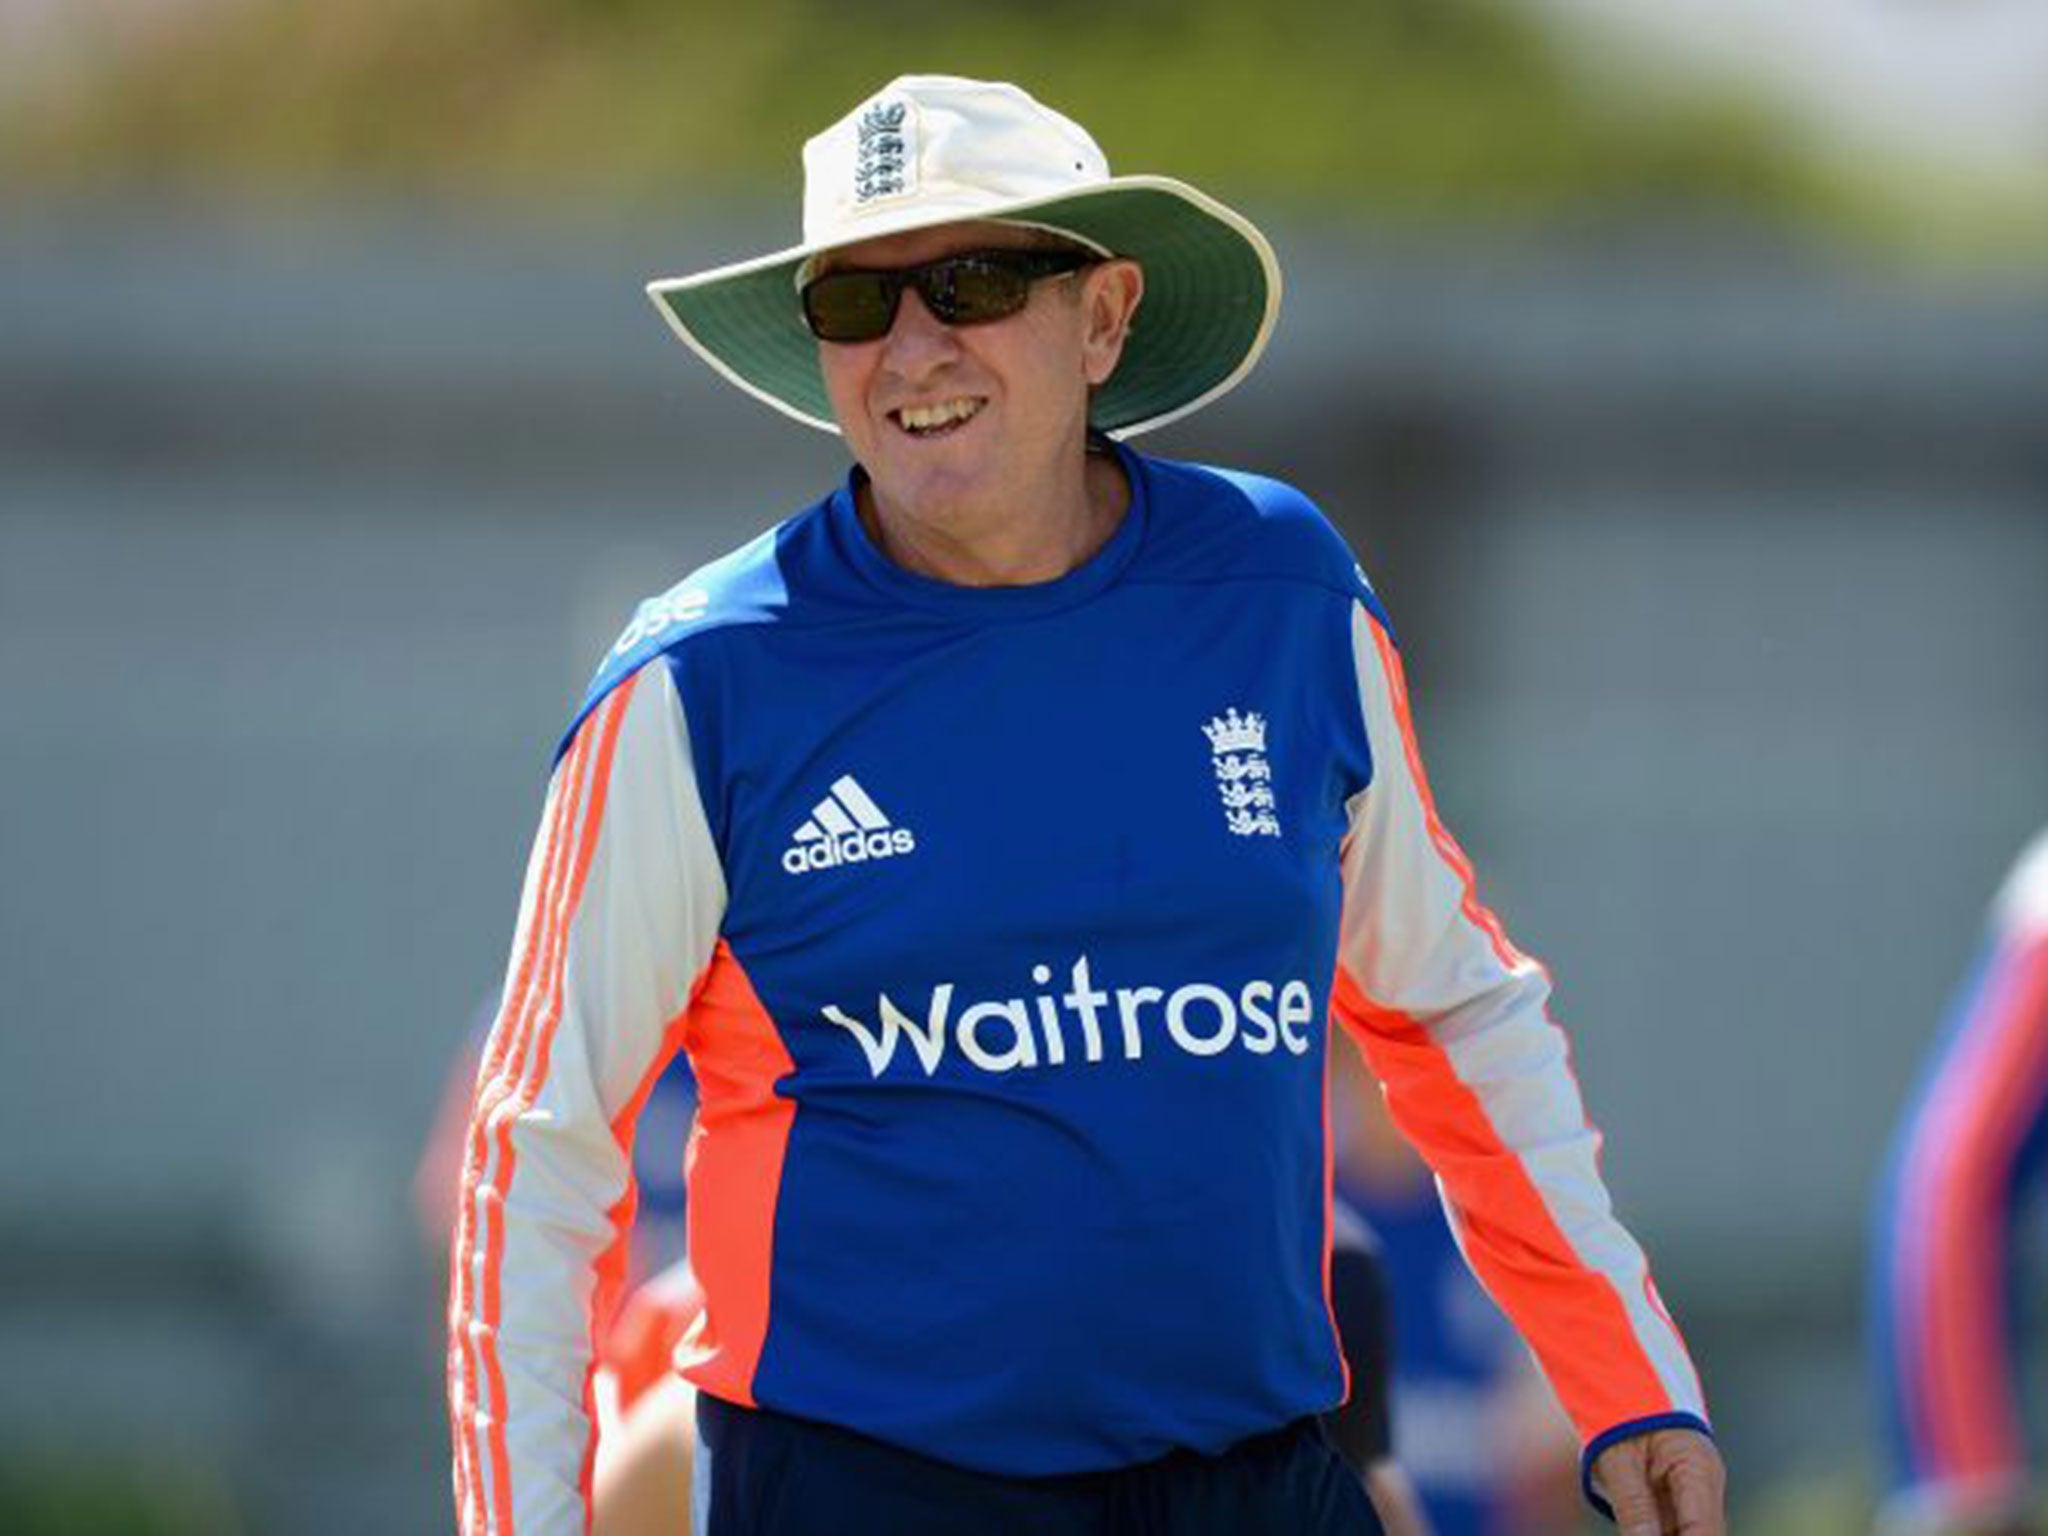 Trevor Bayliss has called on his players to continue being bold